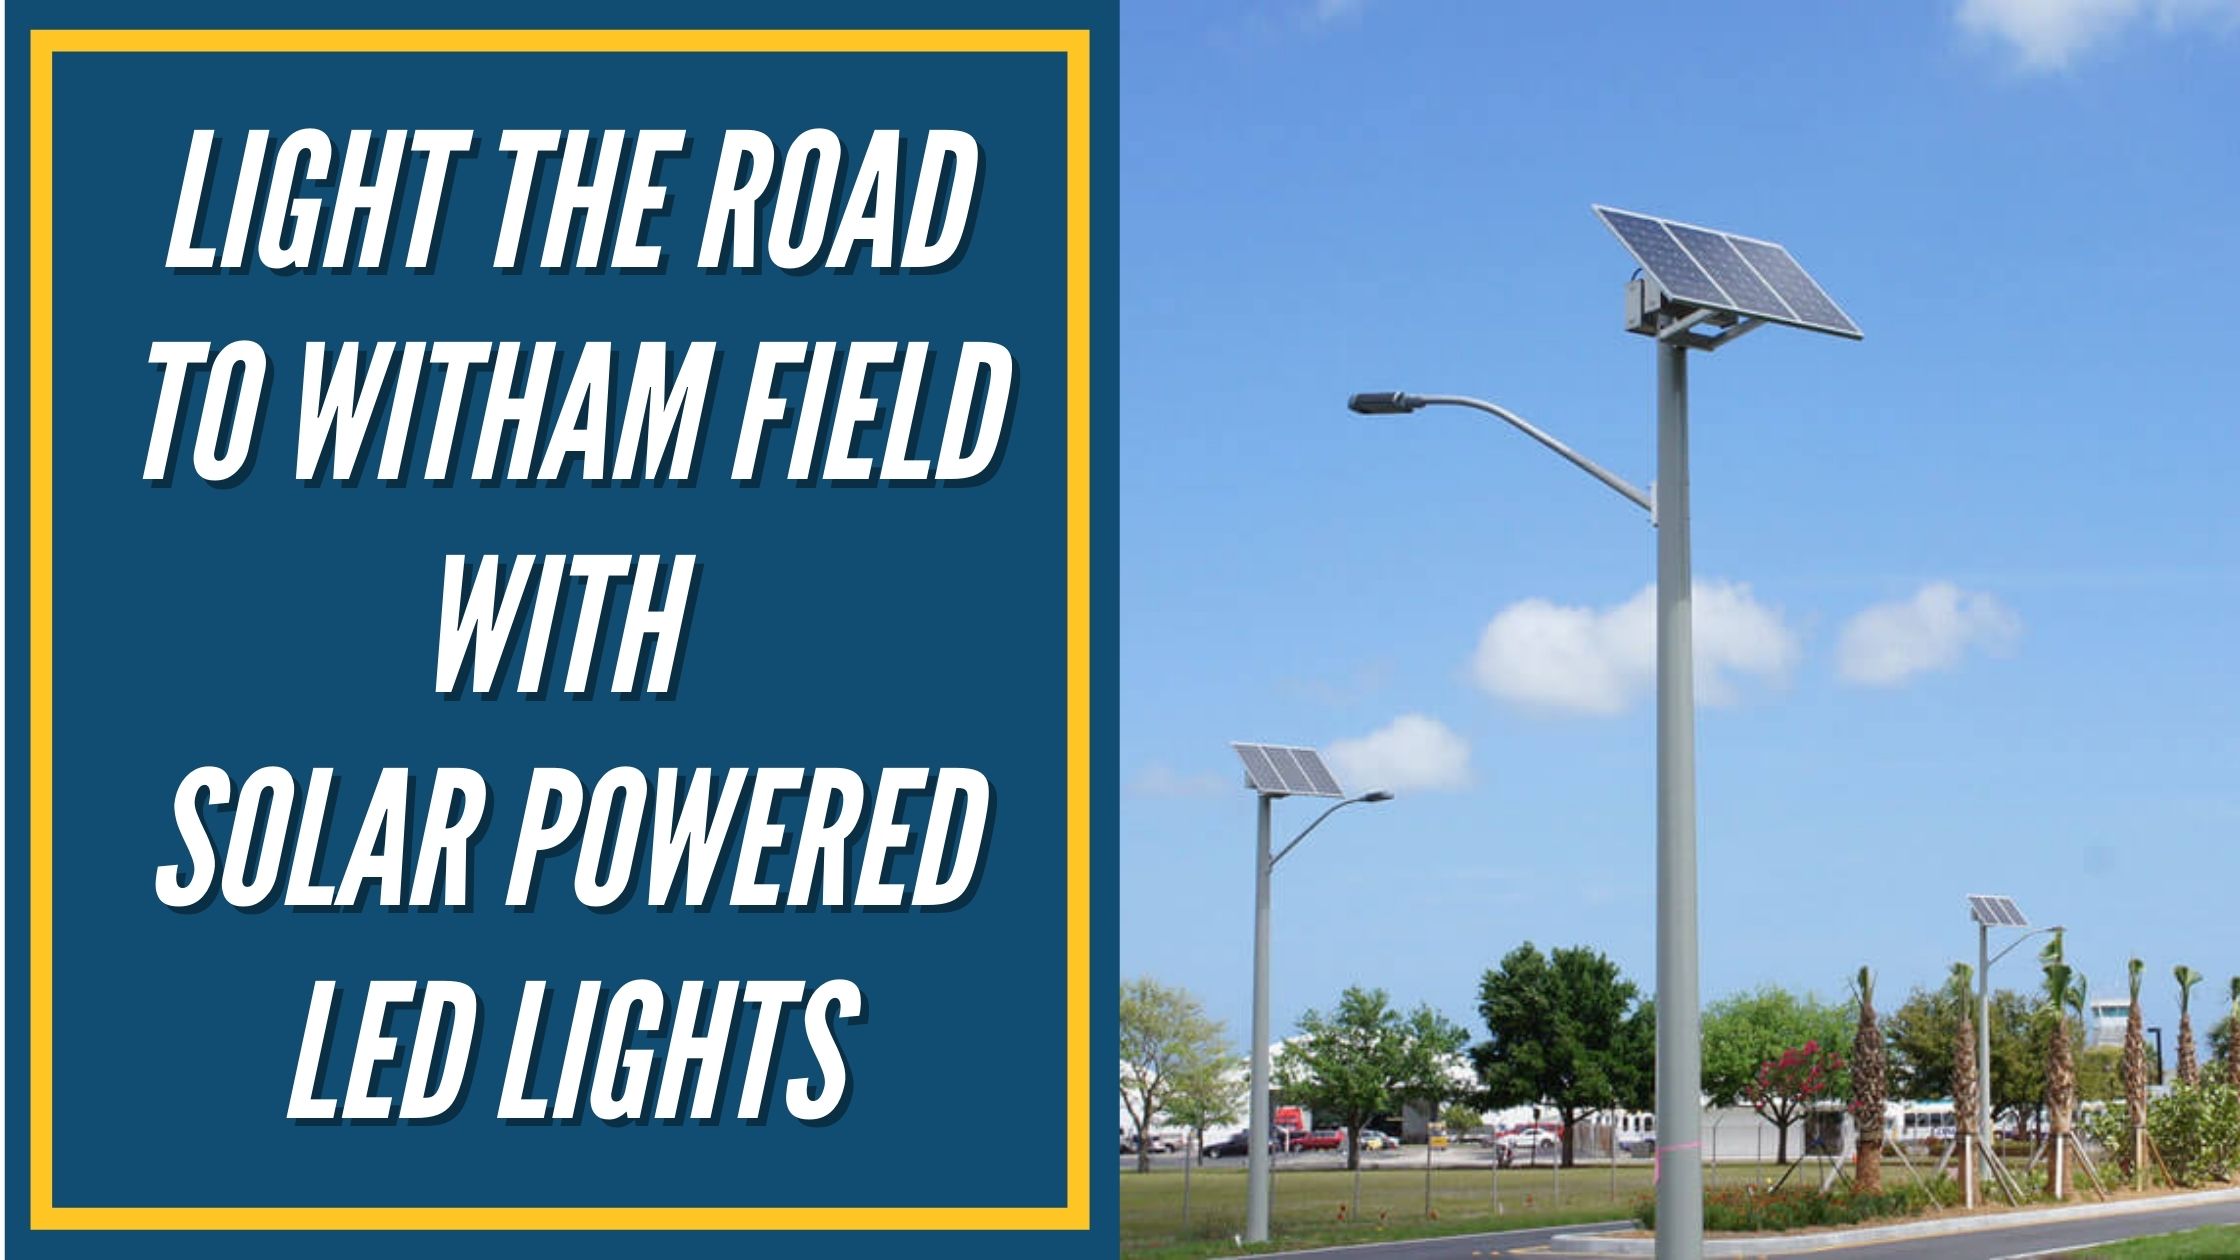 Light the Road to Witham Field with Solar Powered LED Lights